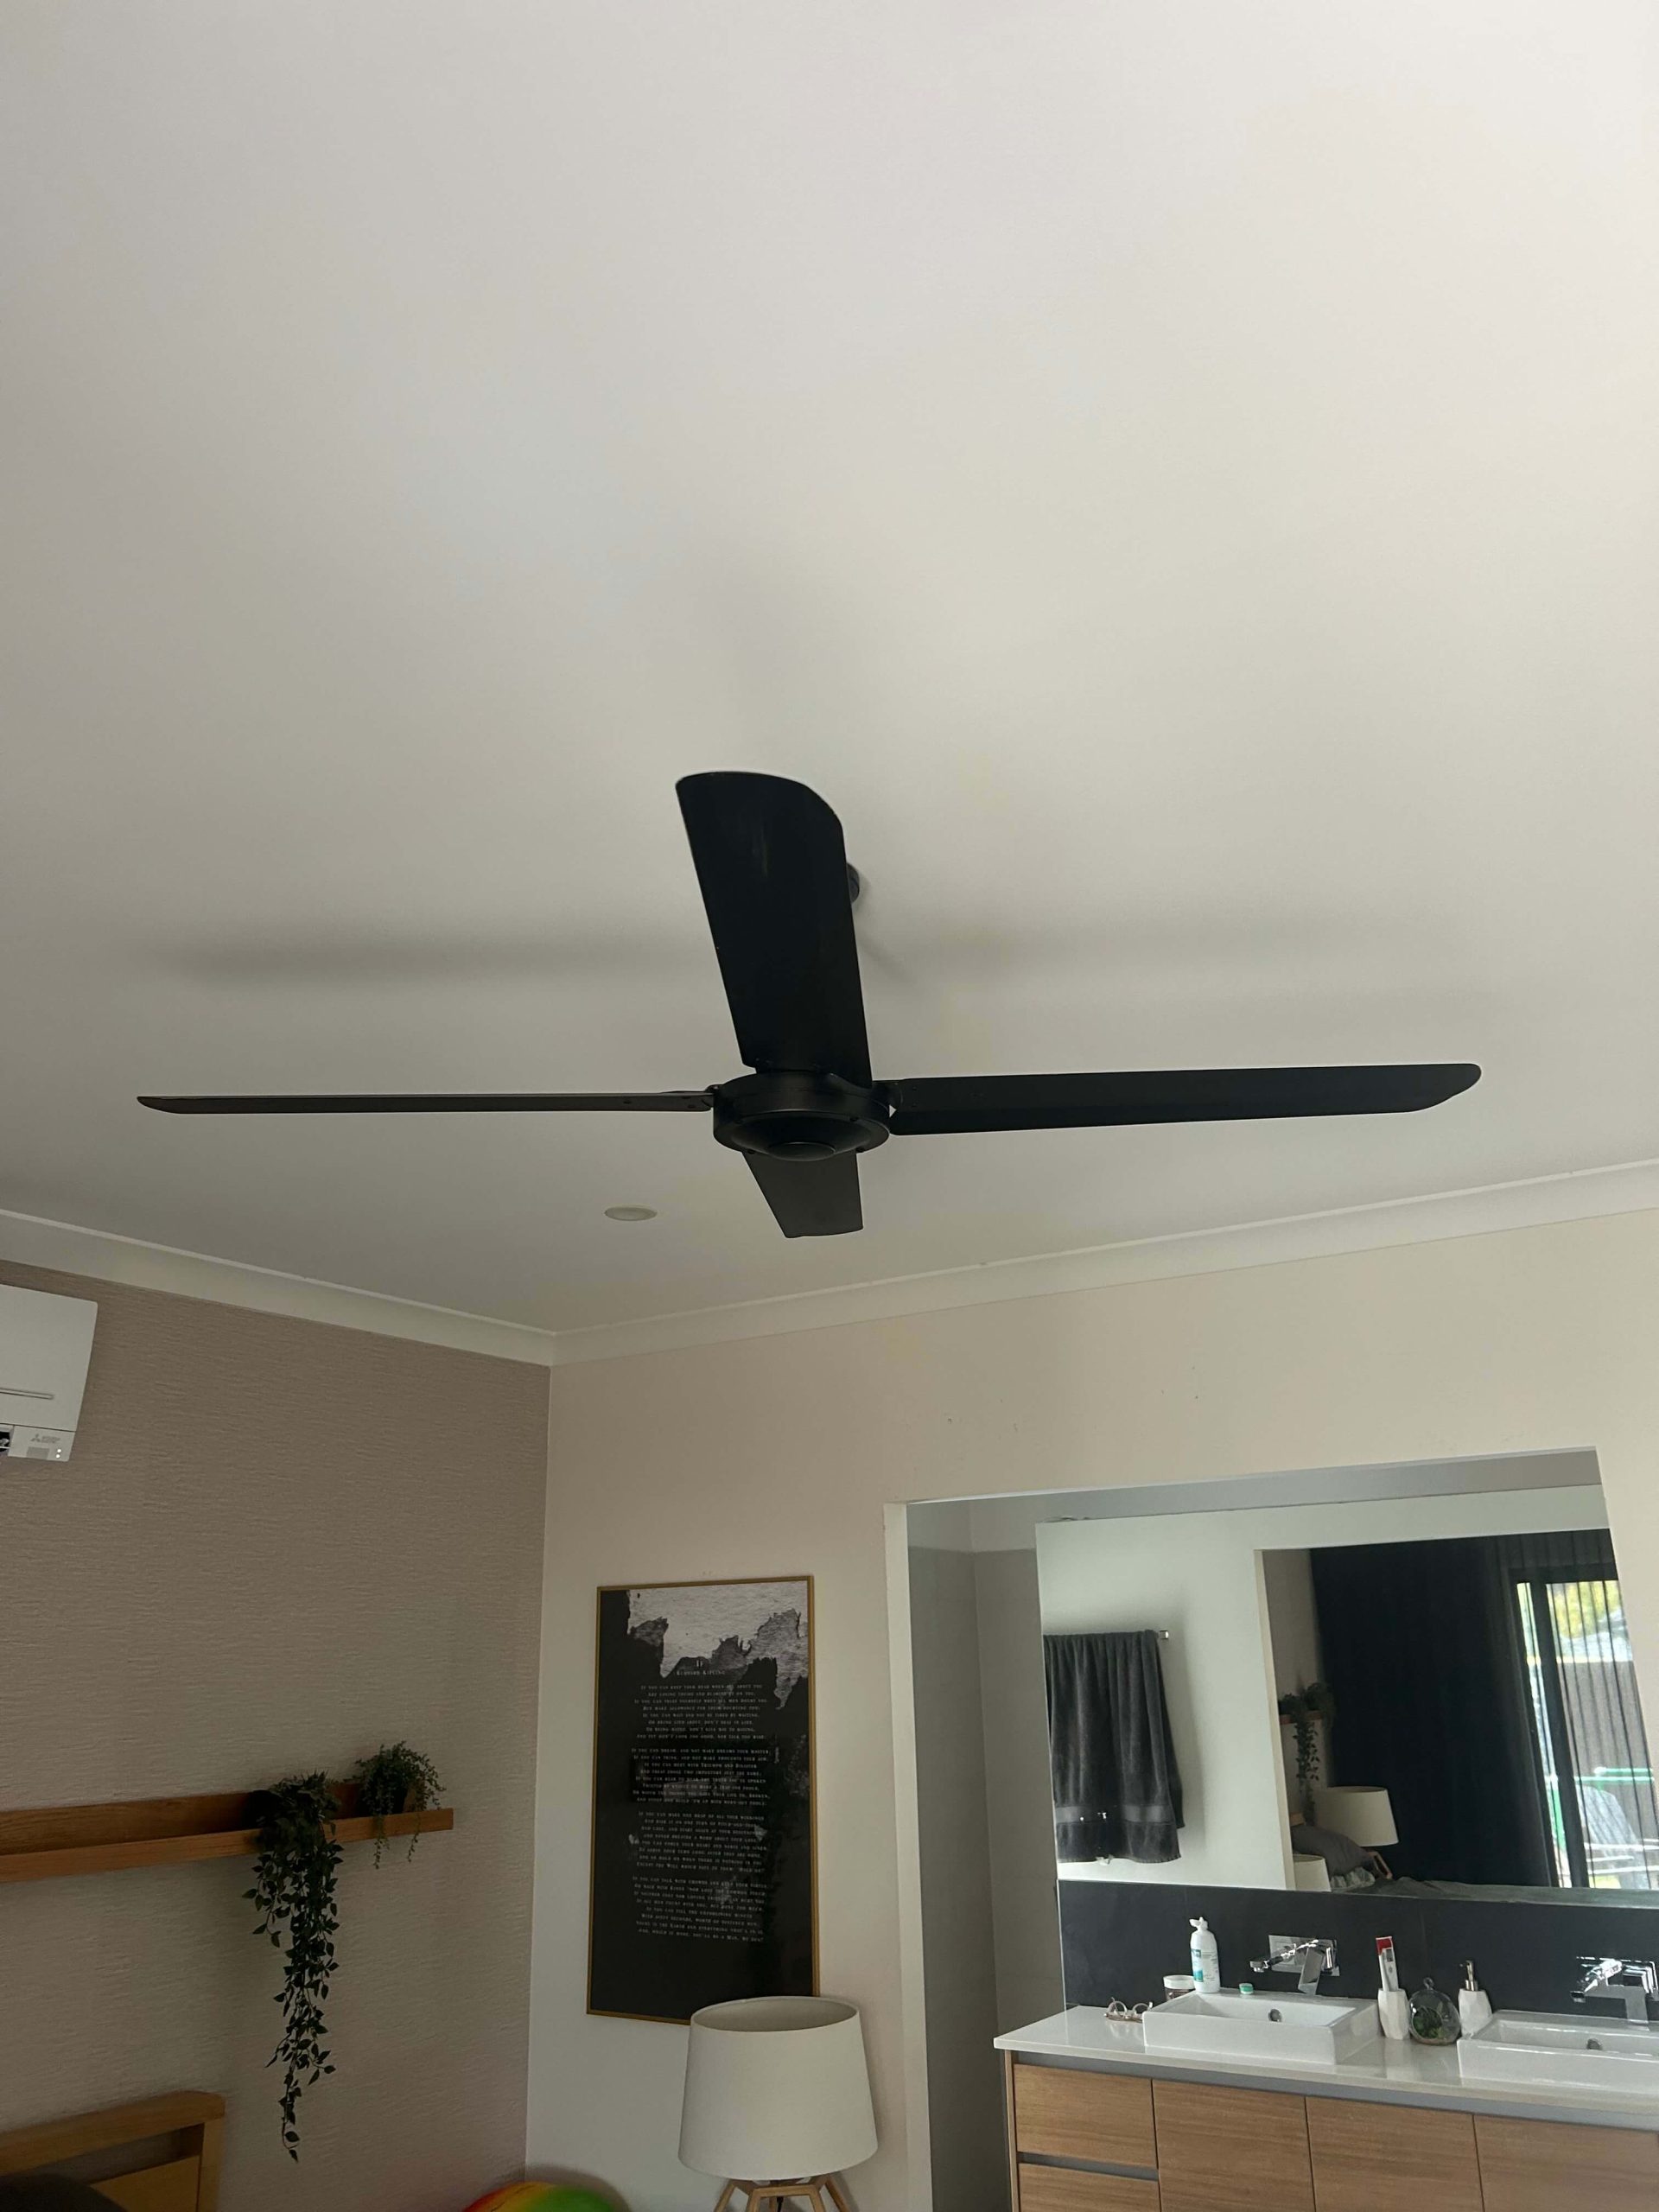 connex electrical electricians in brisbane